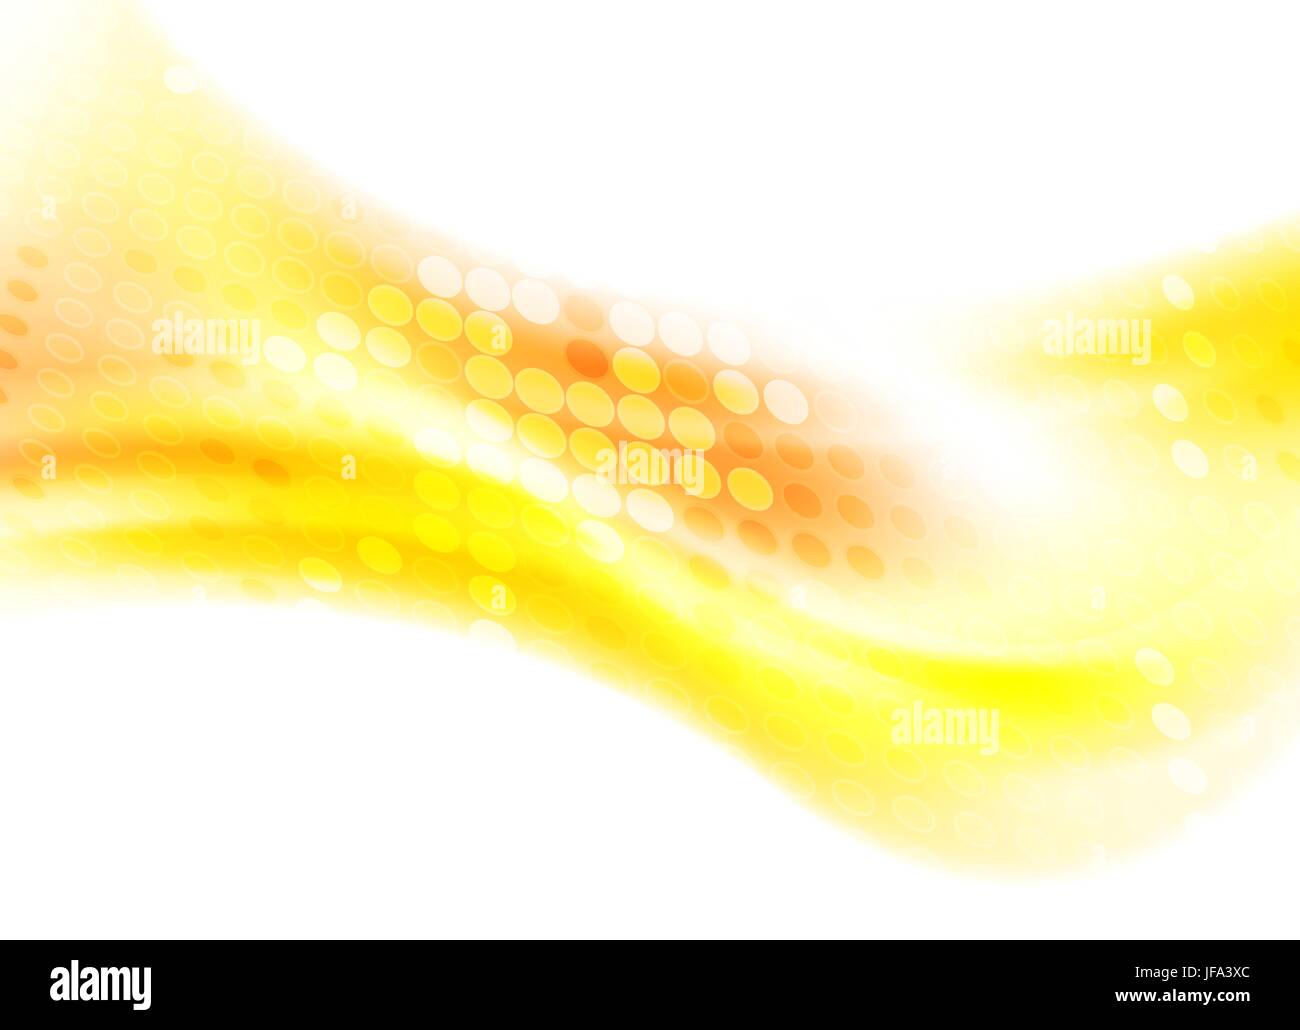 Abstract flowing yellow wavy graphic design Stock Photo